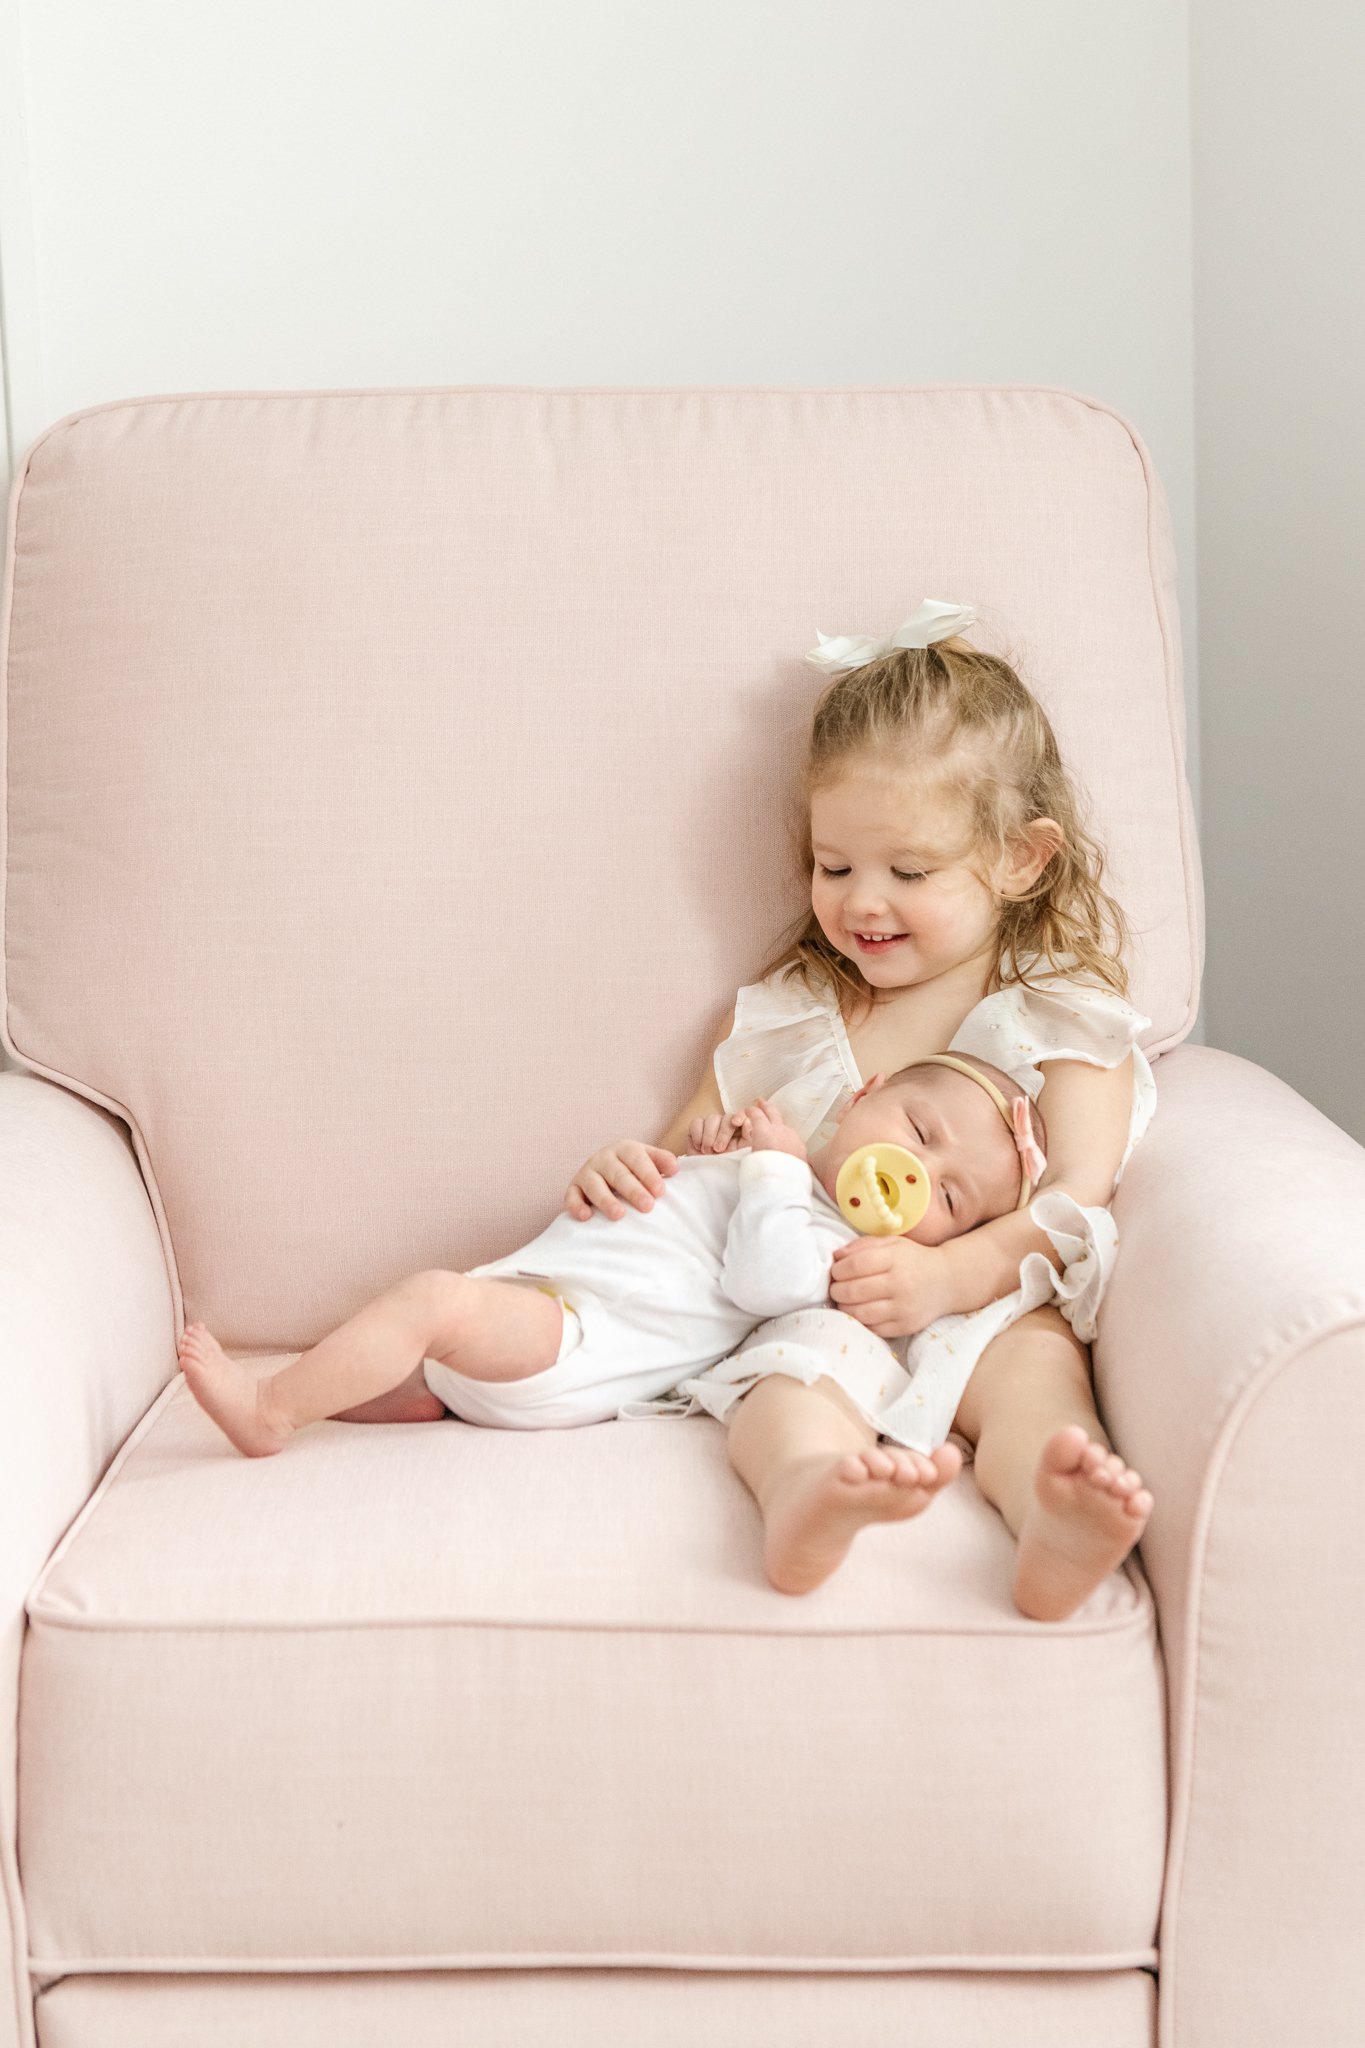  Sitting in a pink rocker a toddler's big sister holds her baby sister in her lap by Nicole Hawkins PHoootgraphy. big sister holding baby sister sisters #NicoleHawkinsPhotography #NicoleHawkinsNewborns #Babygirl #Newbornfamilyportraits #ChathamNewbor